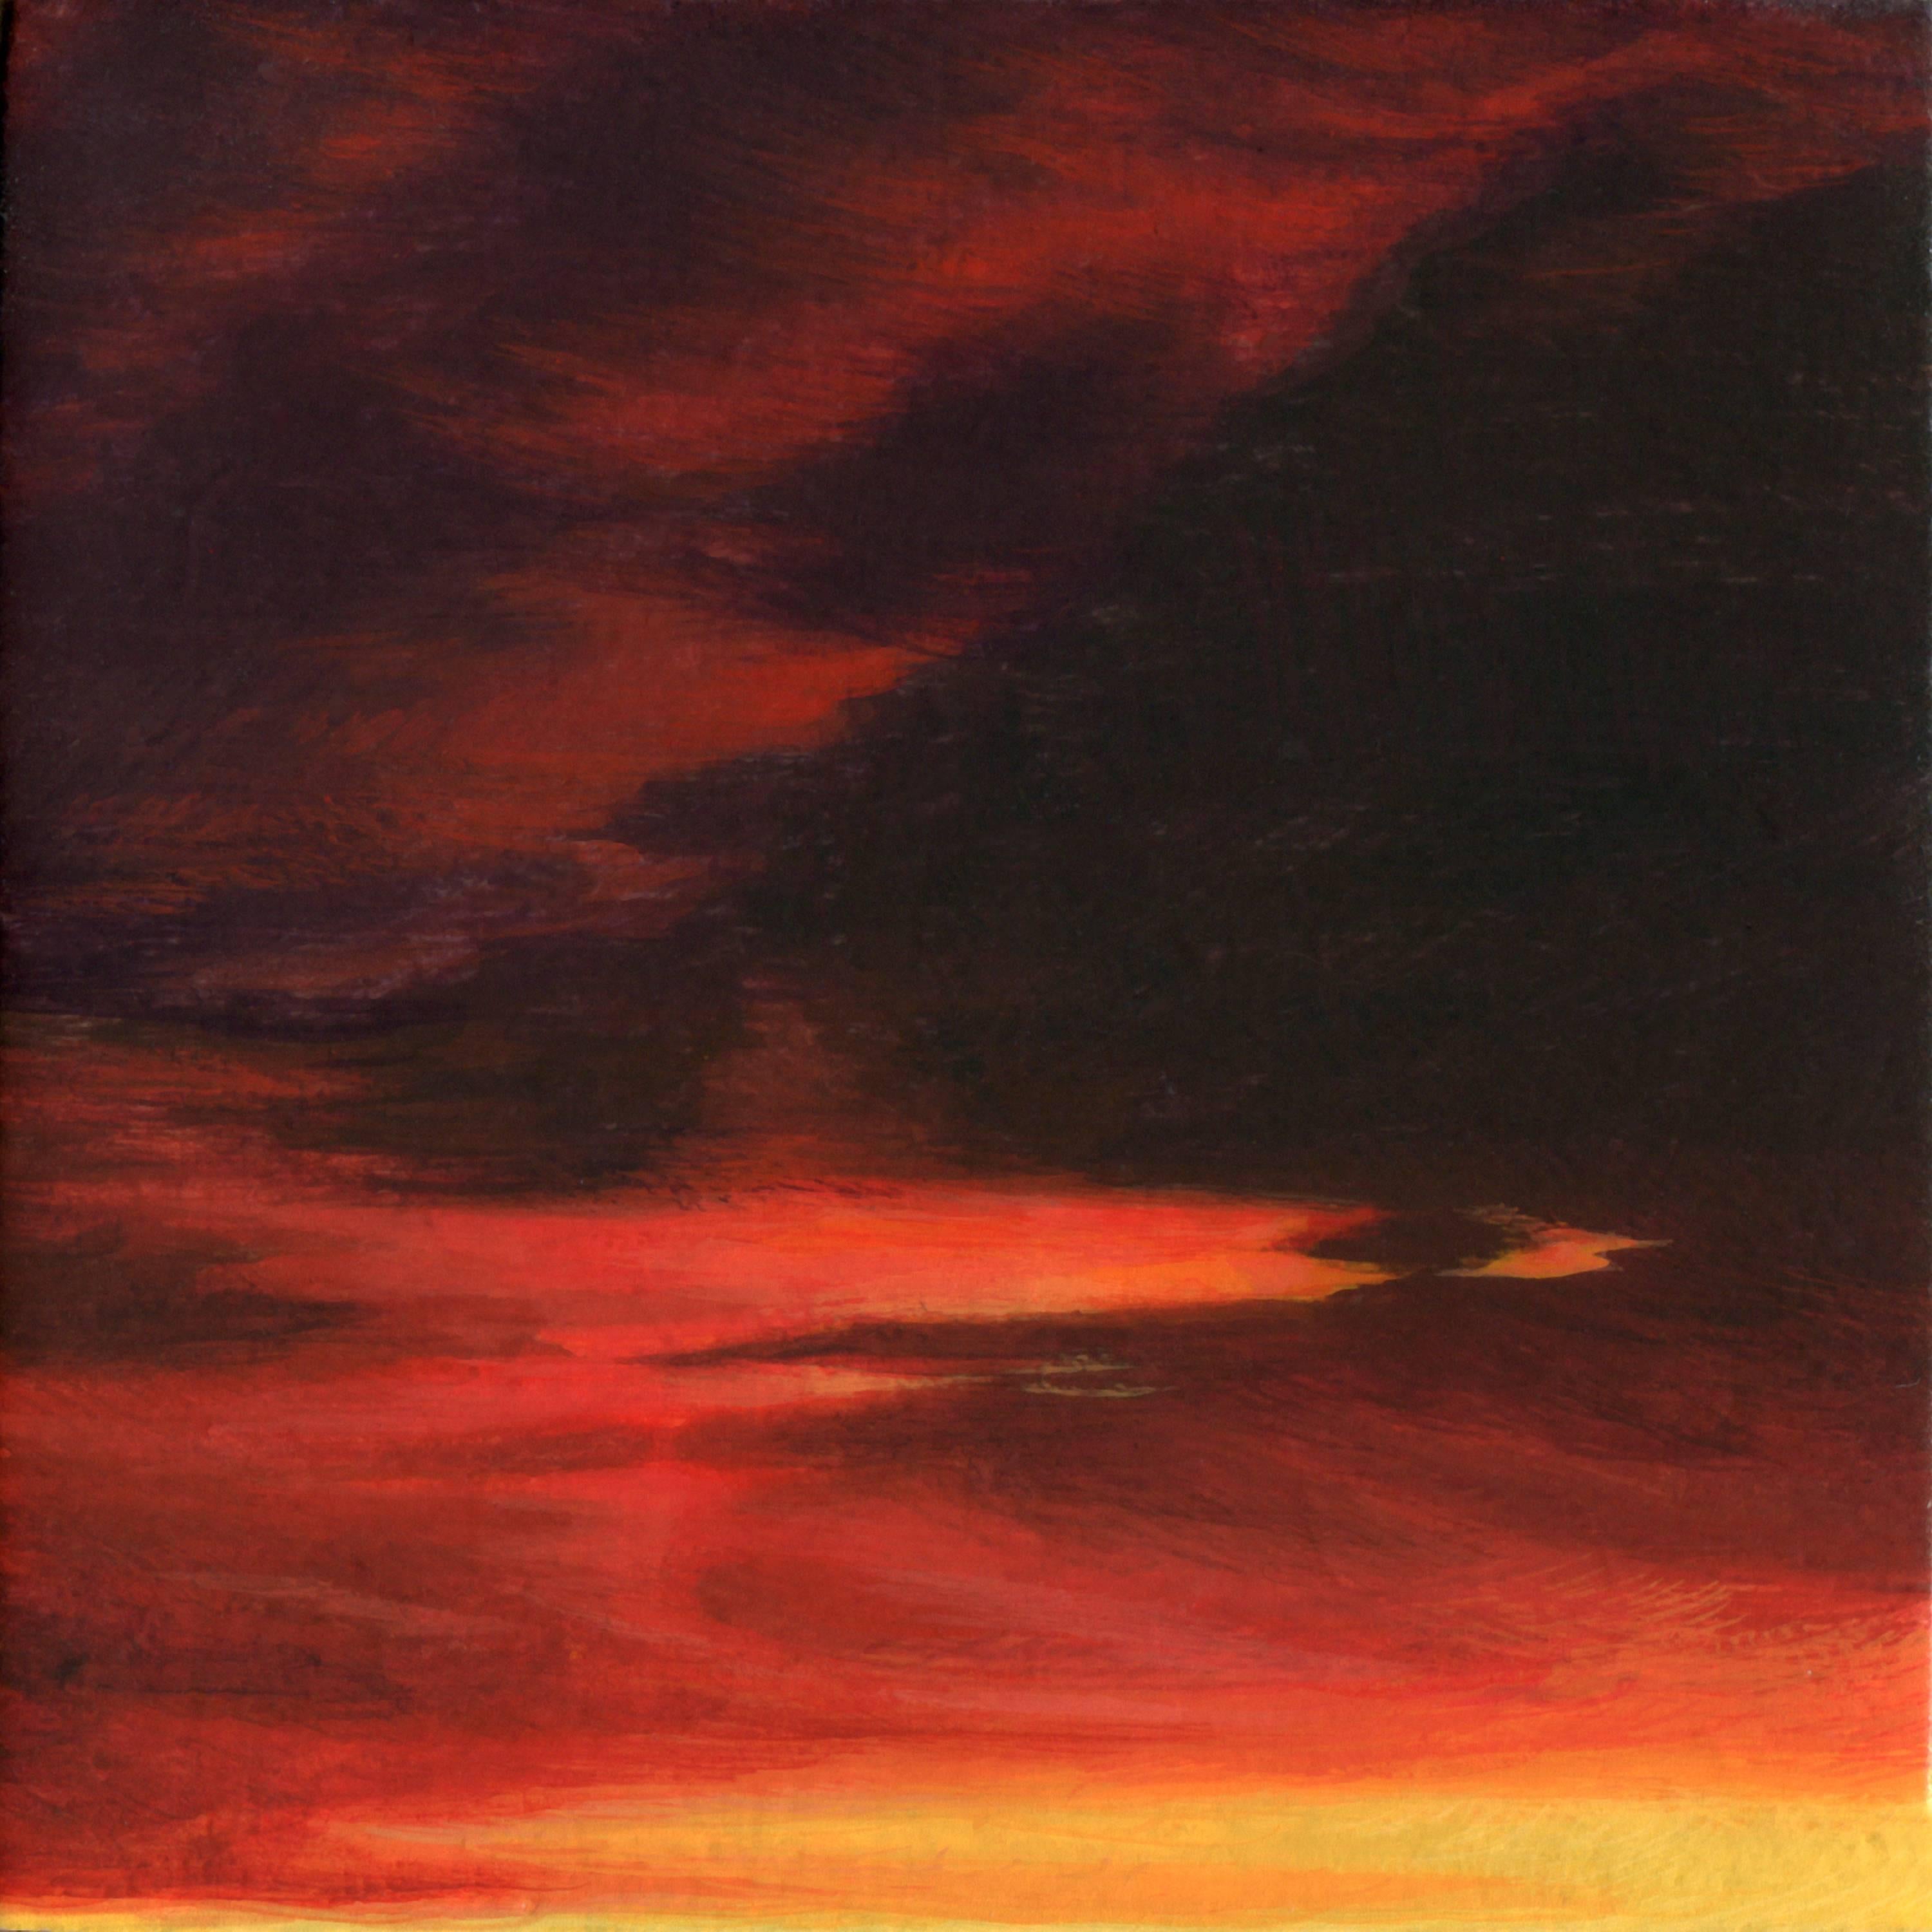 Red Sky in the Morning (Day One) - Painting by Adam Mysock